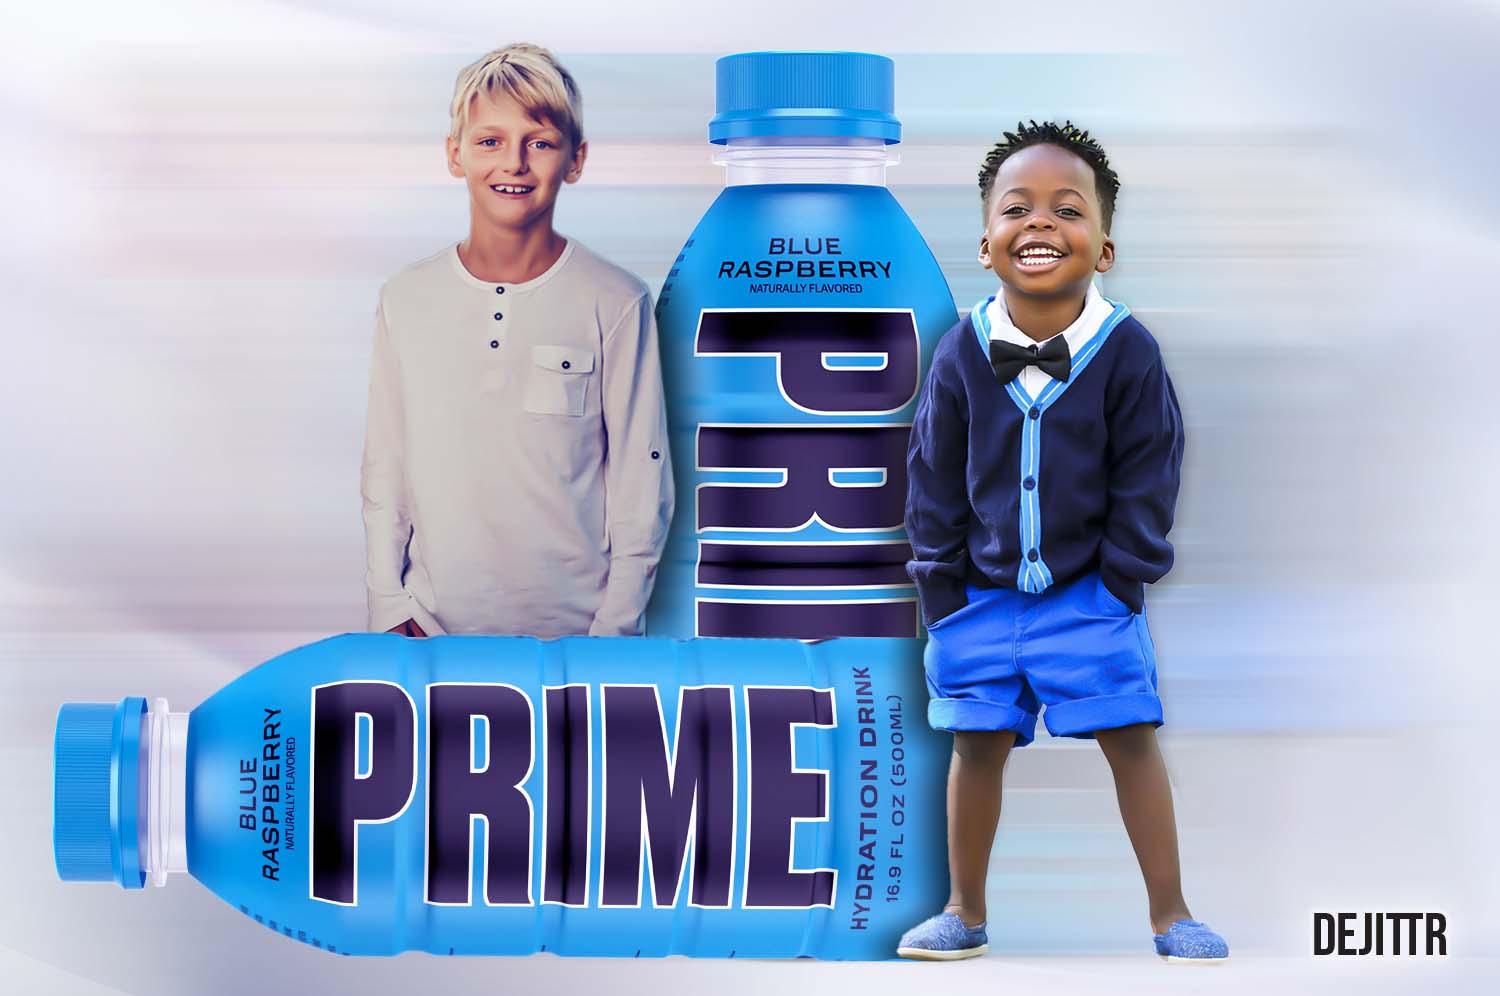 Prime Hydration fans confused as 'subtle difference' in drink's